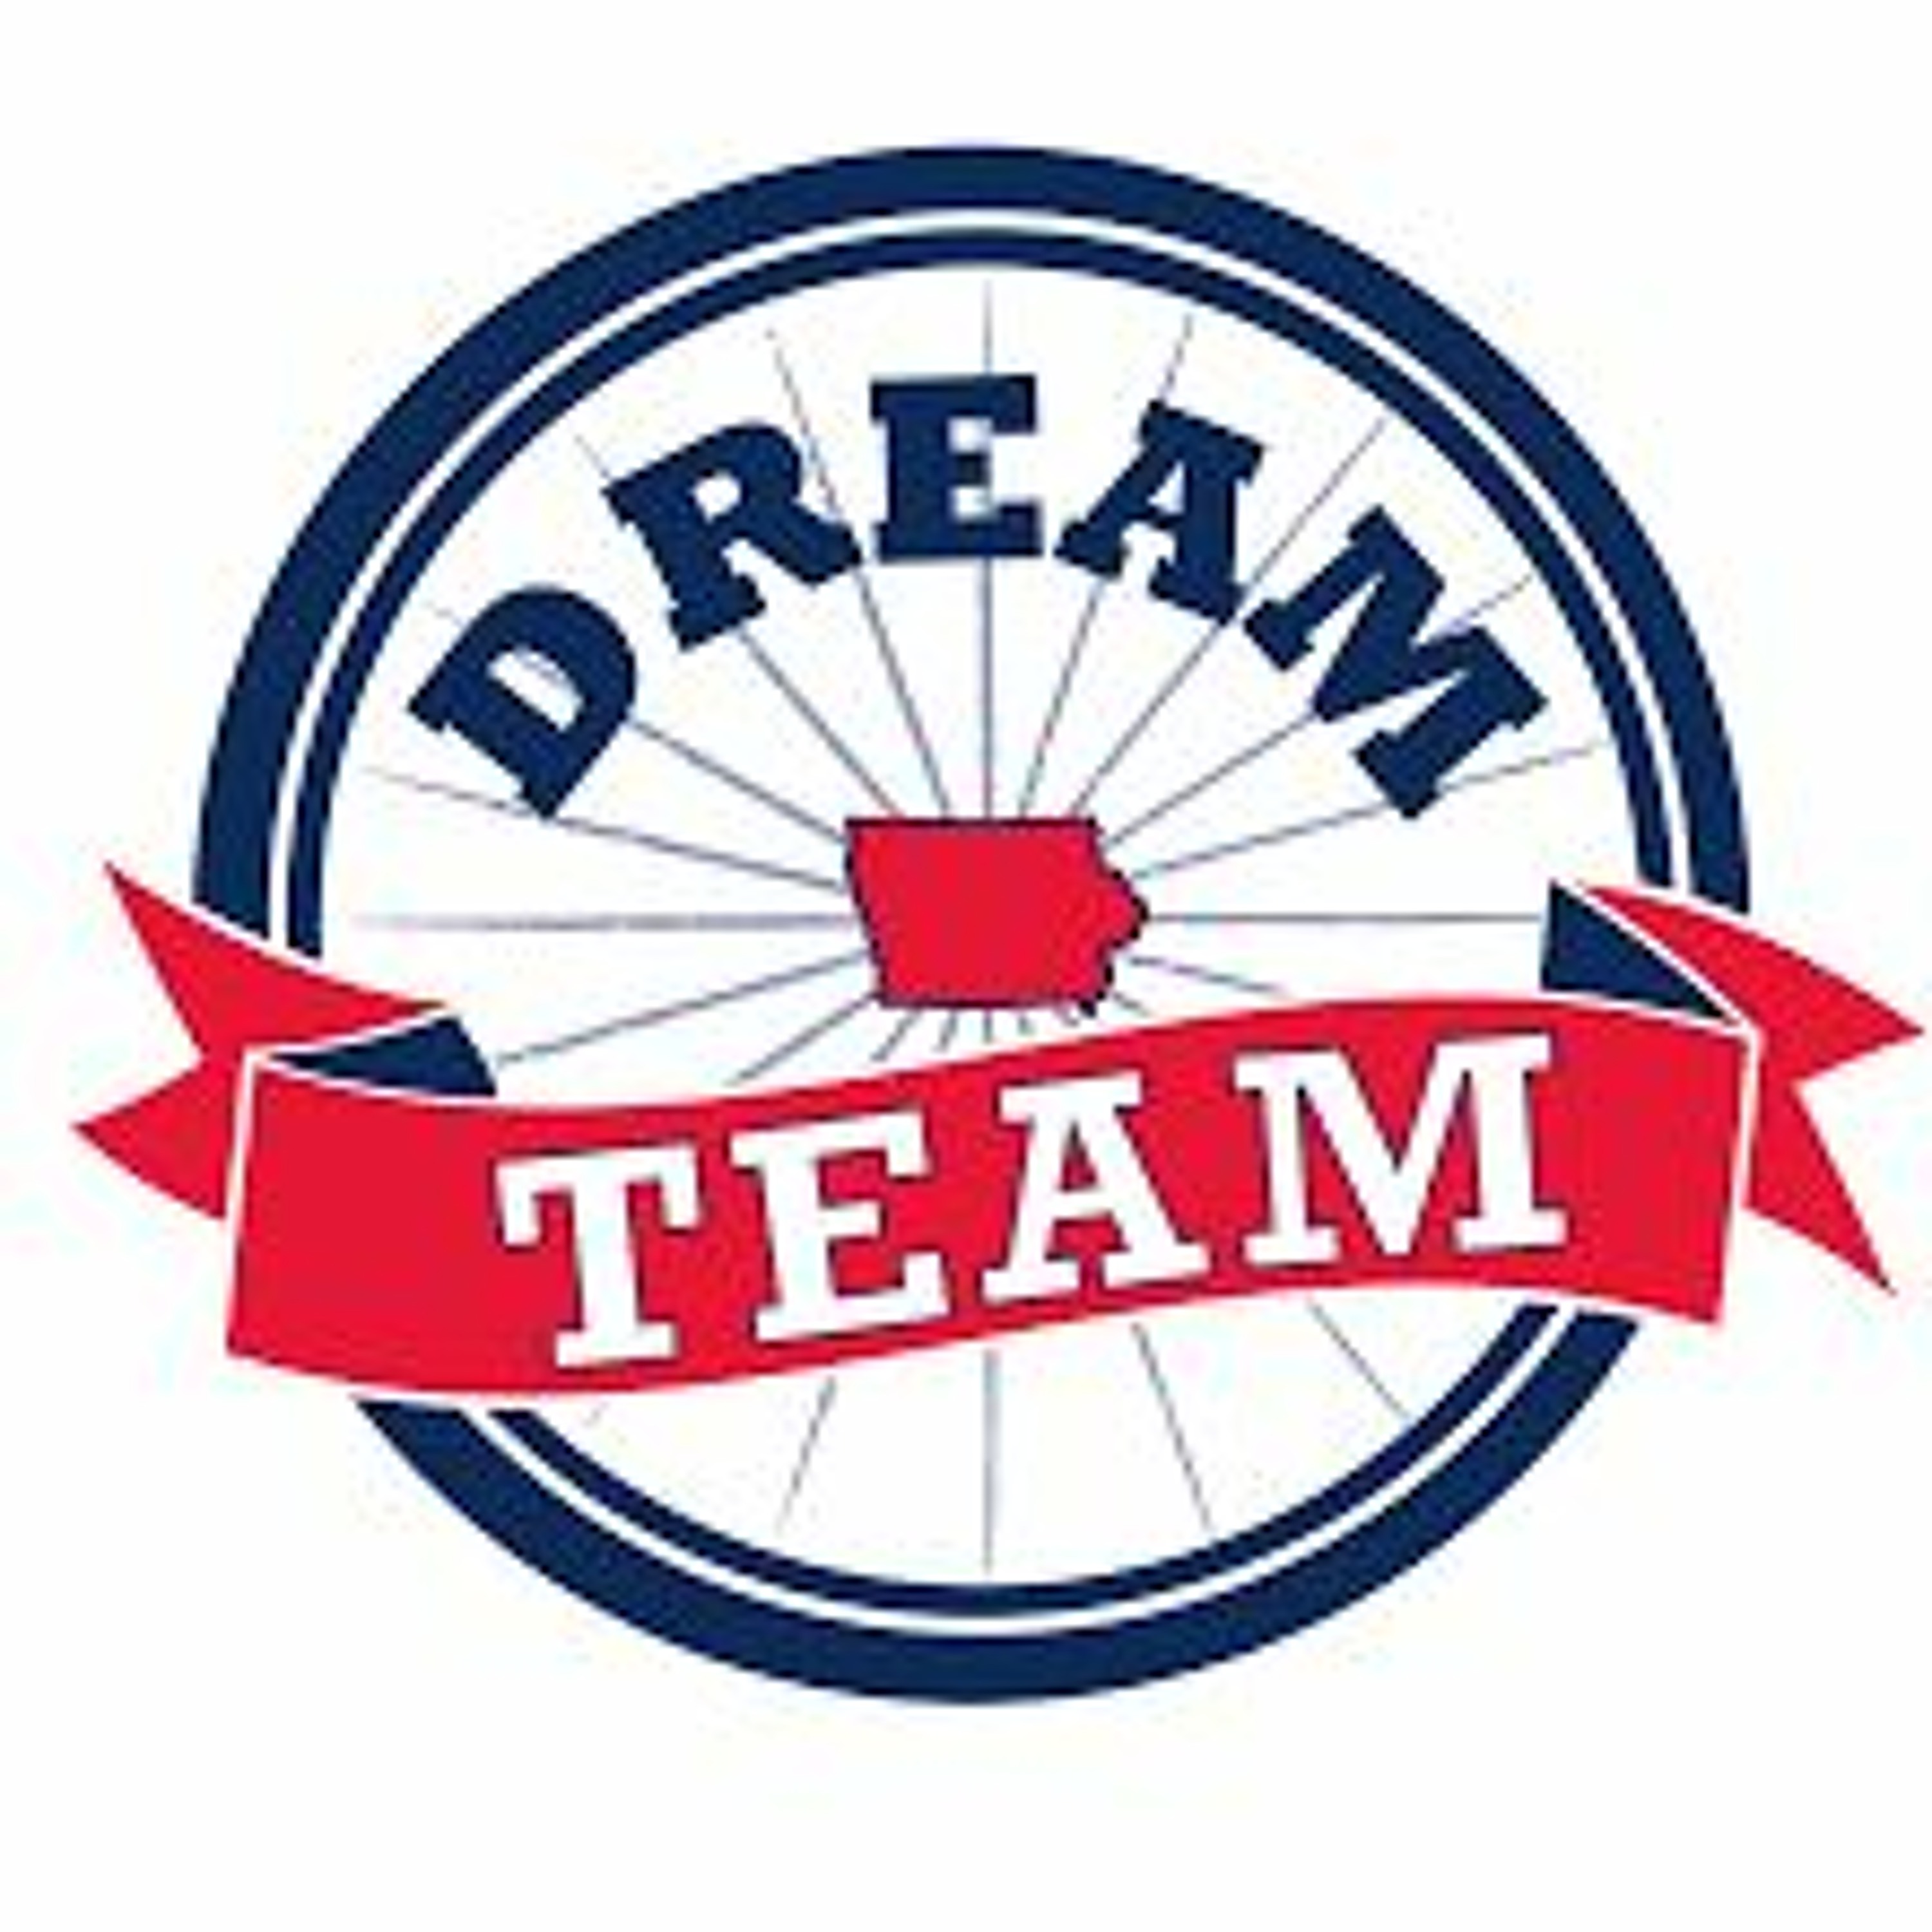 Episode 299: Updates From the Dream Team